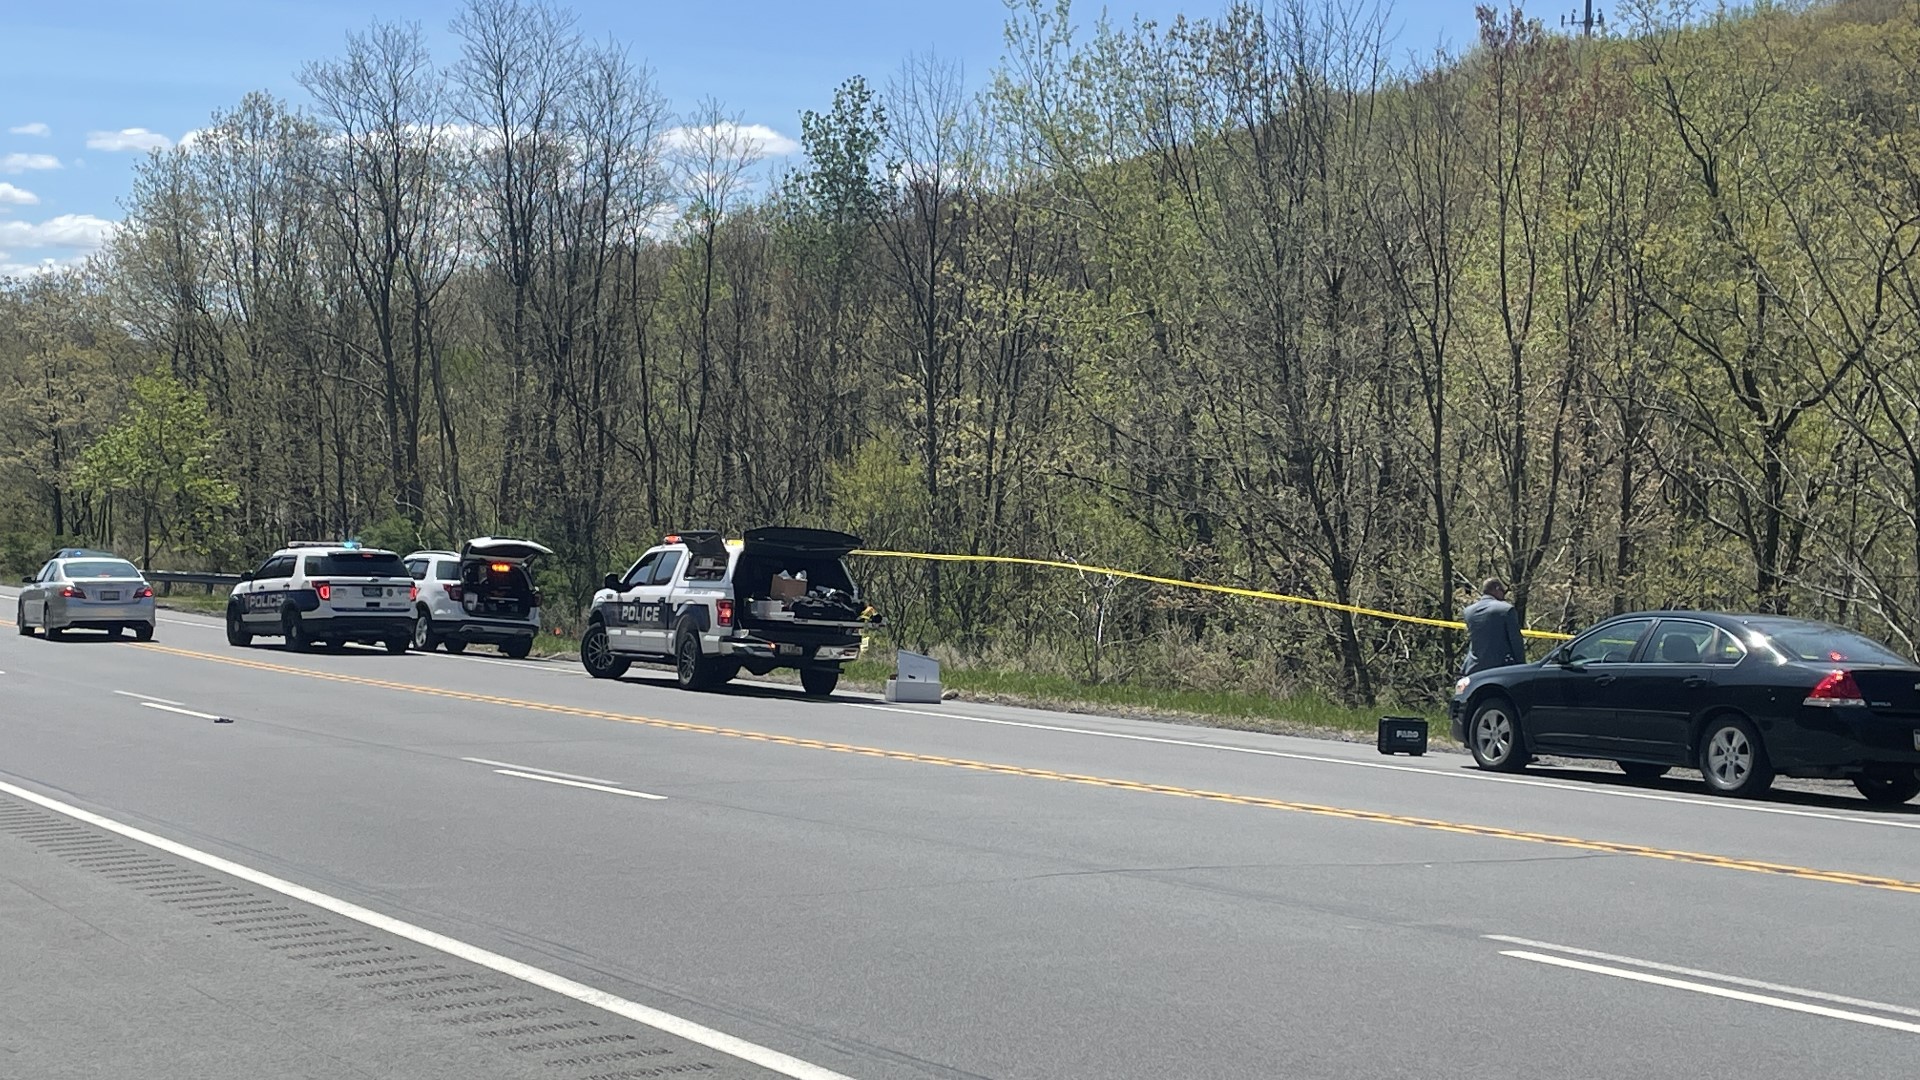 The coroner confirms that the body of a man was found near the Morgan Highway in Scranton.